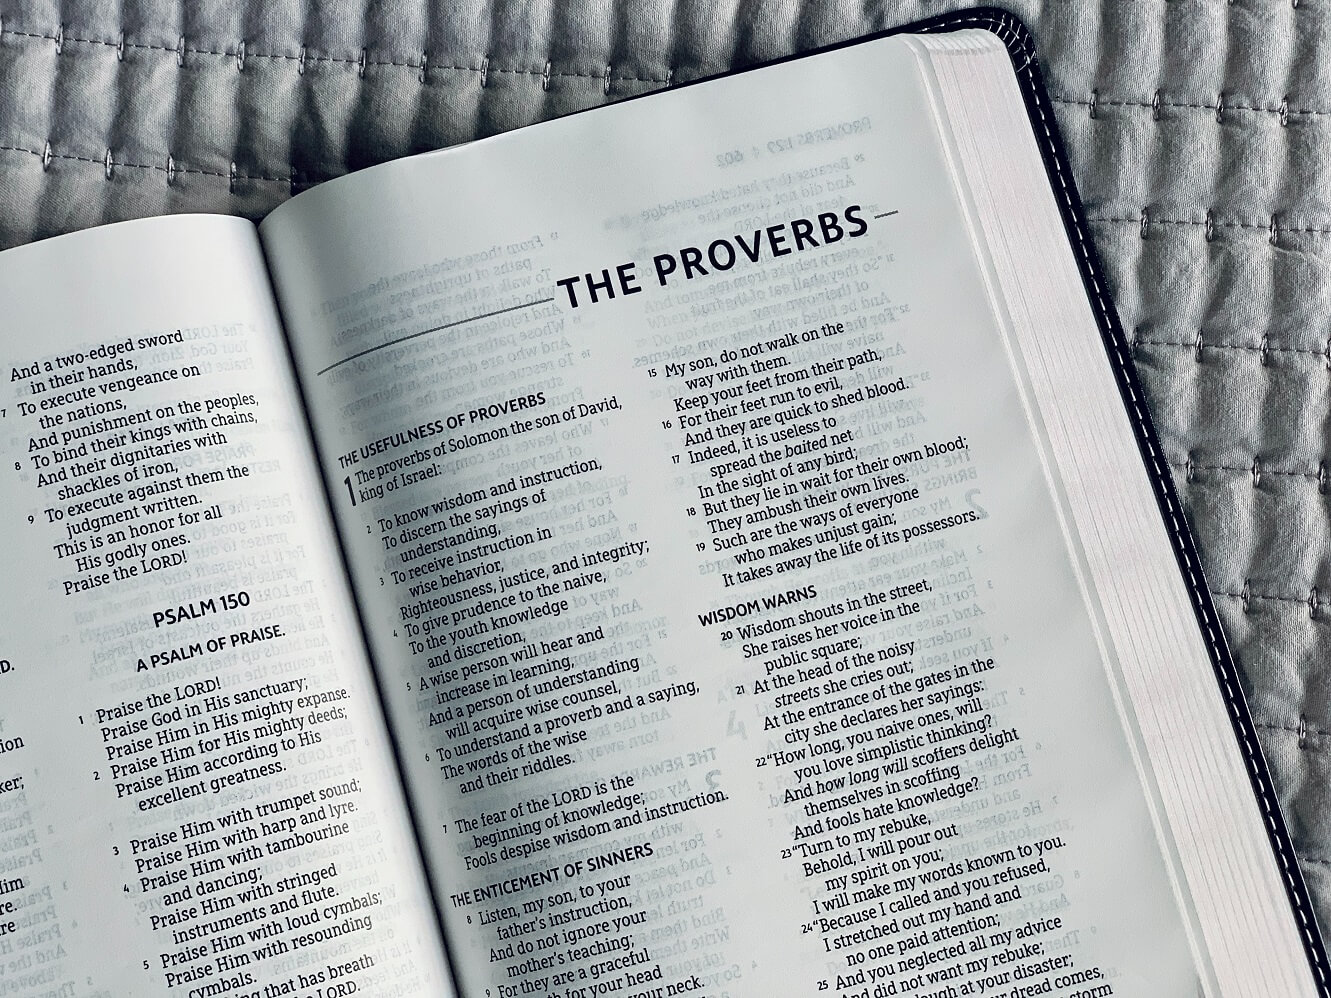 Book of Proverbs from the Bible